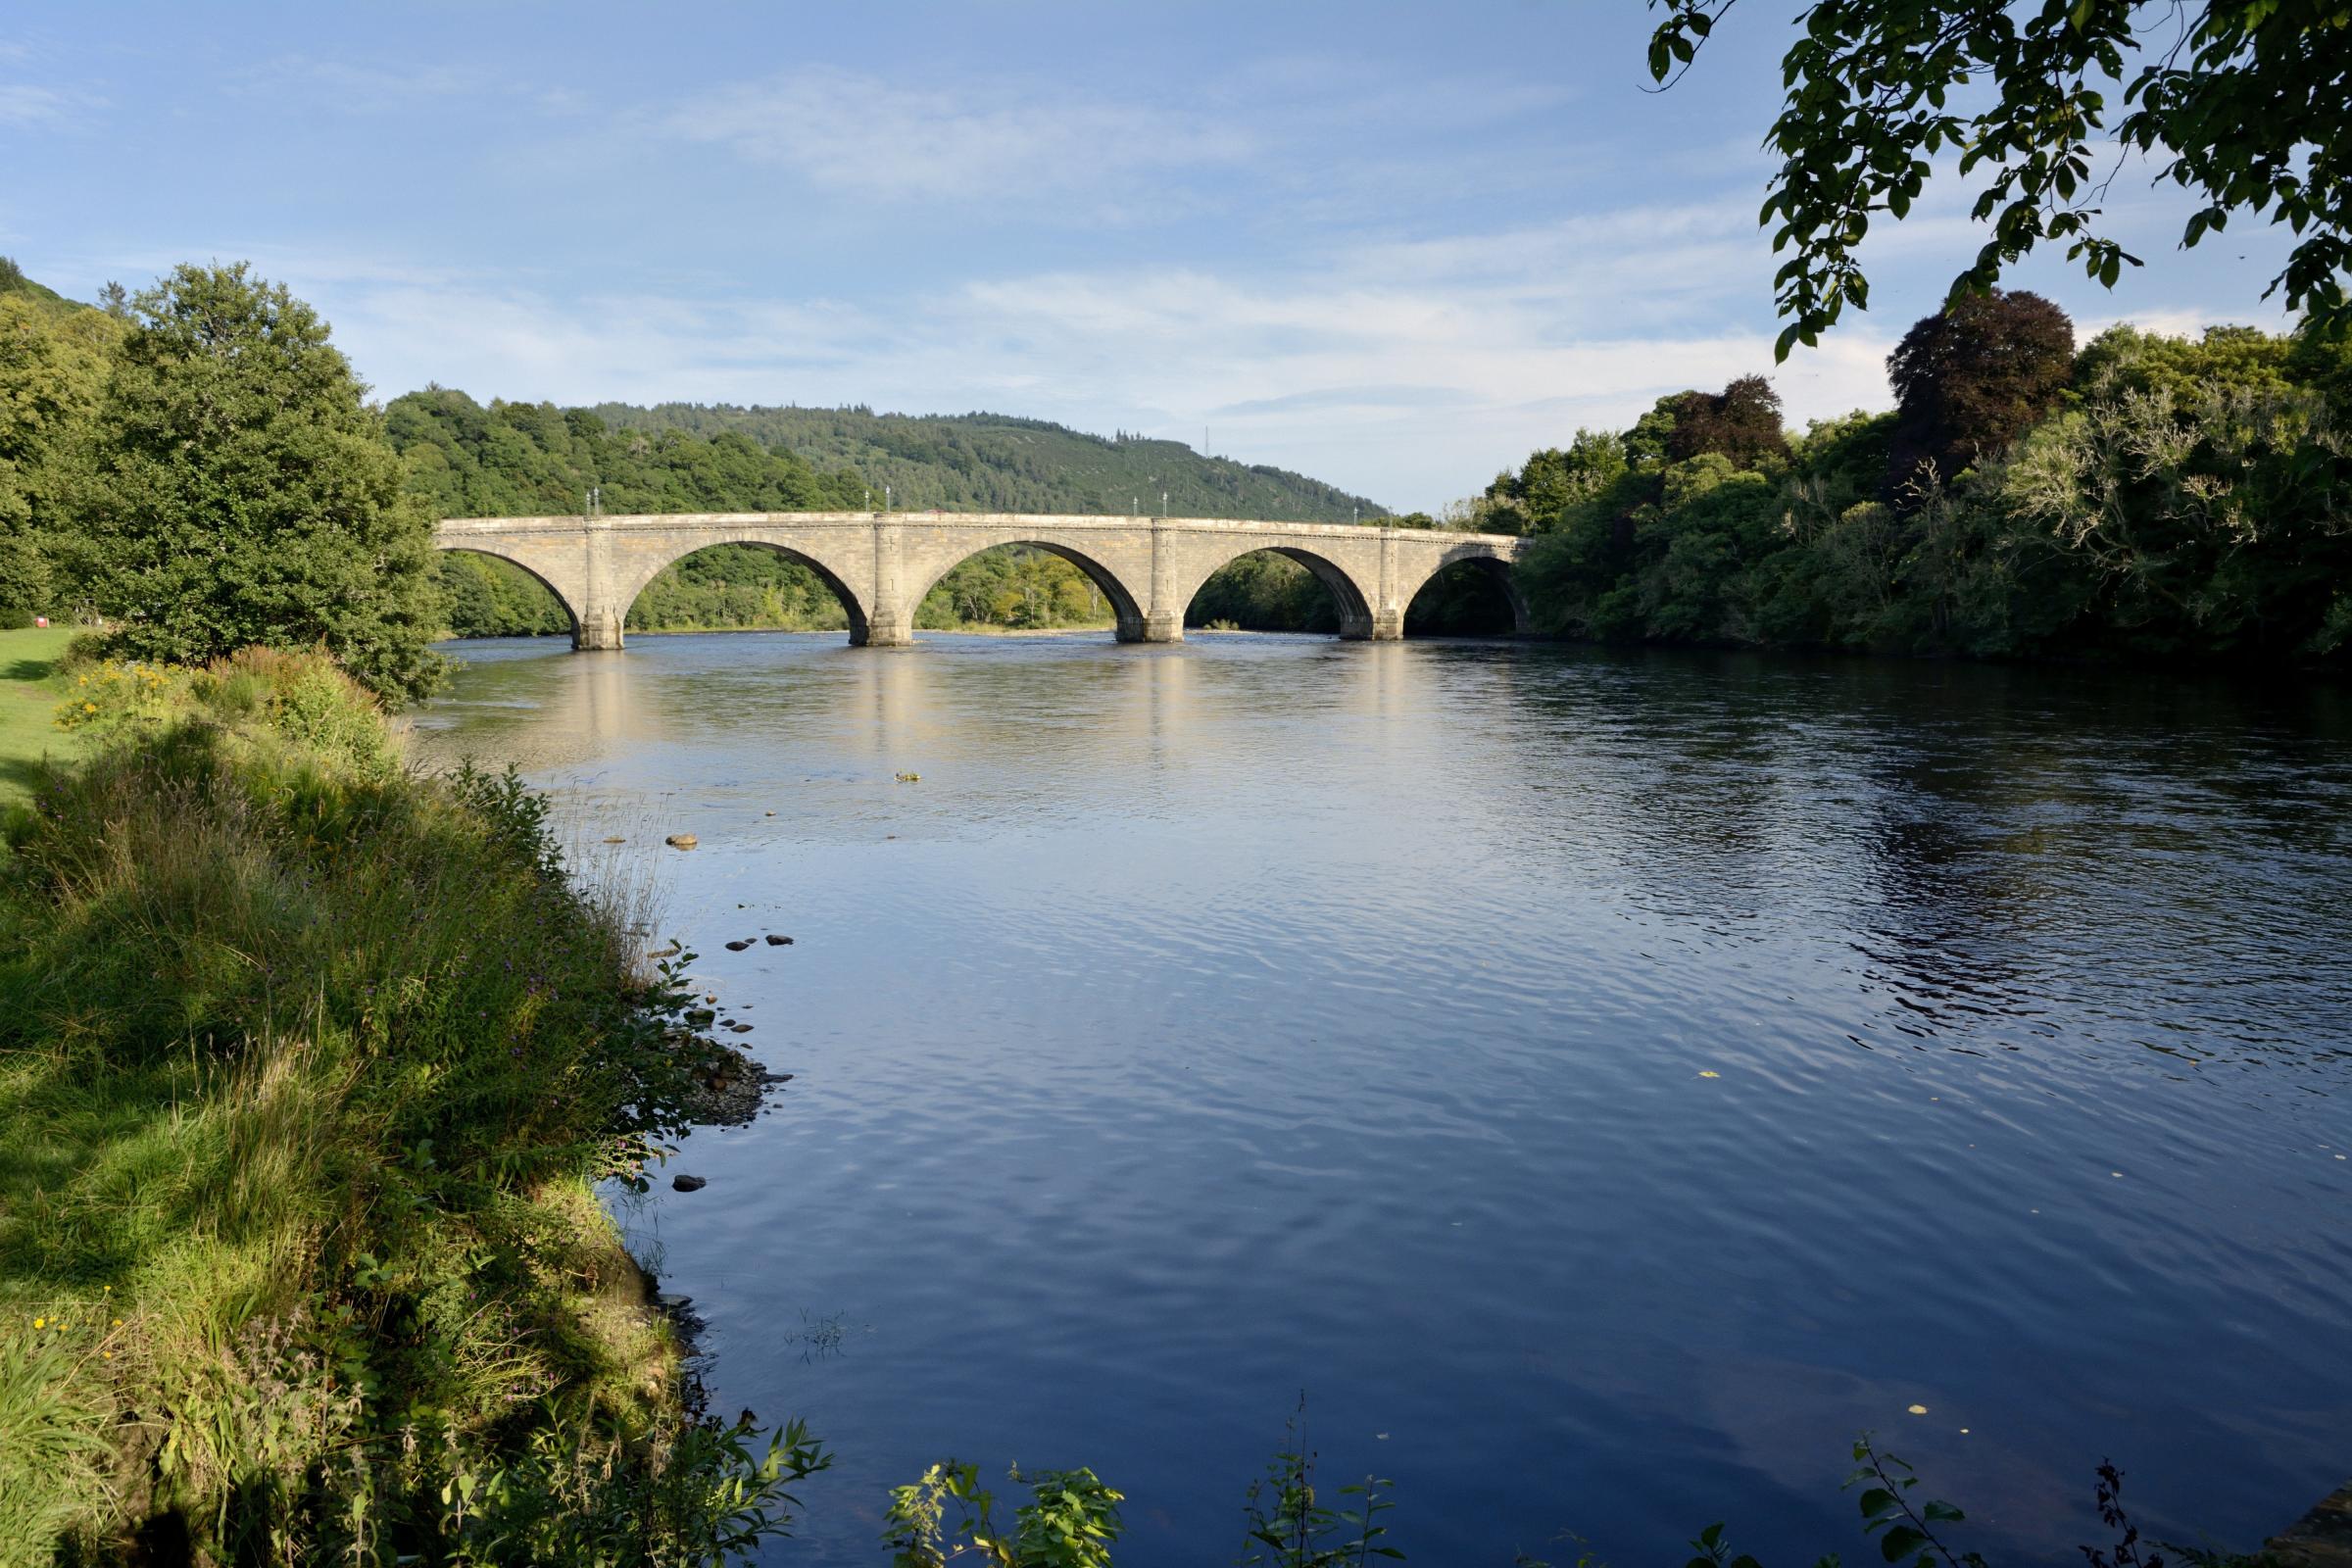 Reel deal: Prestigious River Tay fishing spot up for sale with a pricetag of £1.1 million